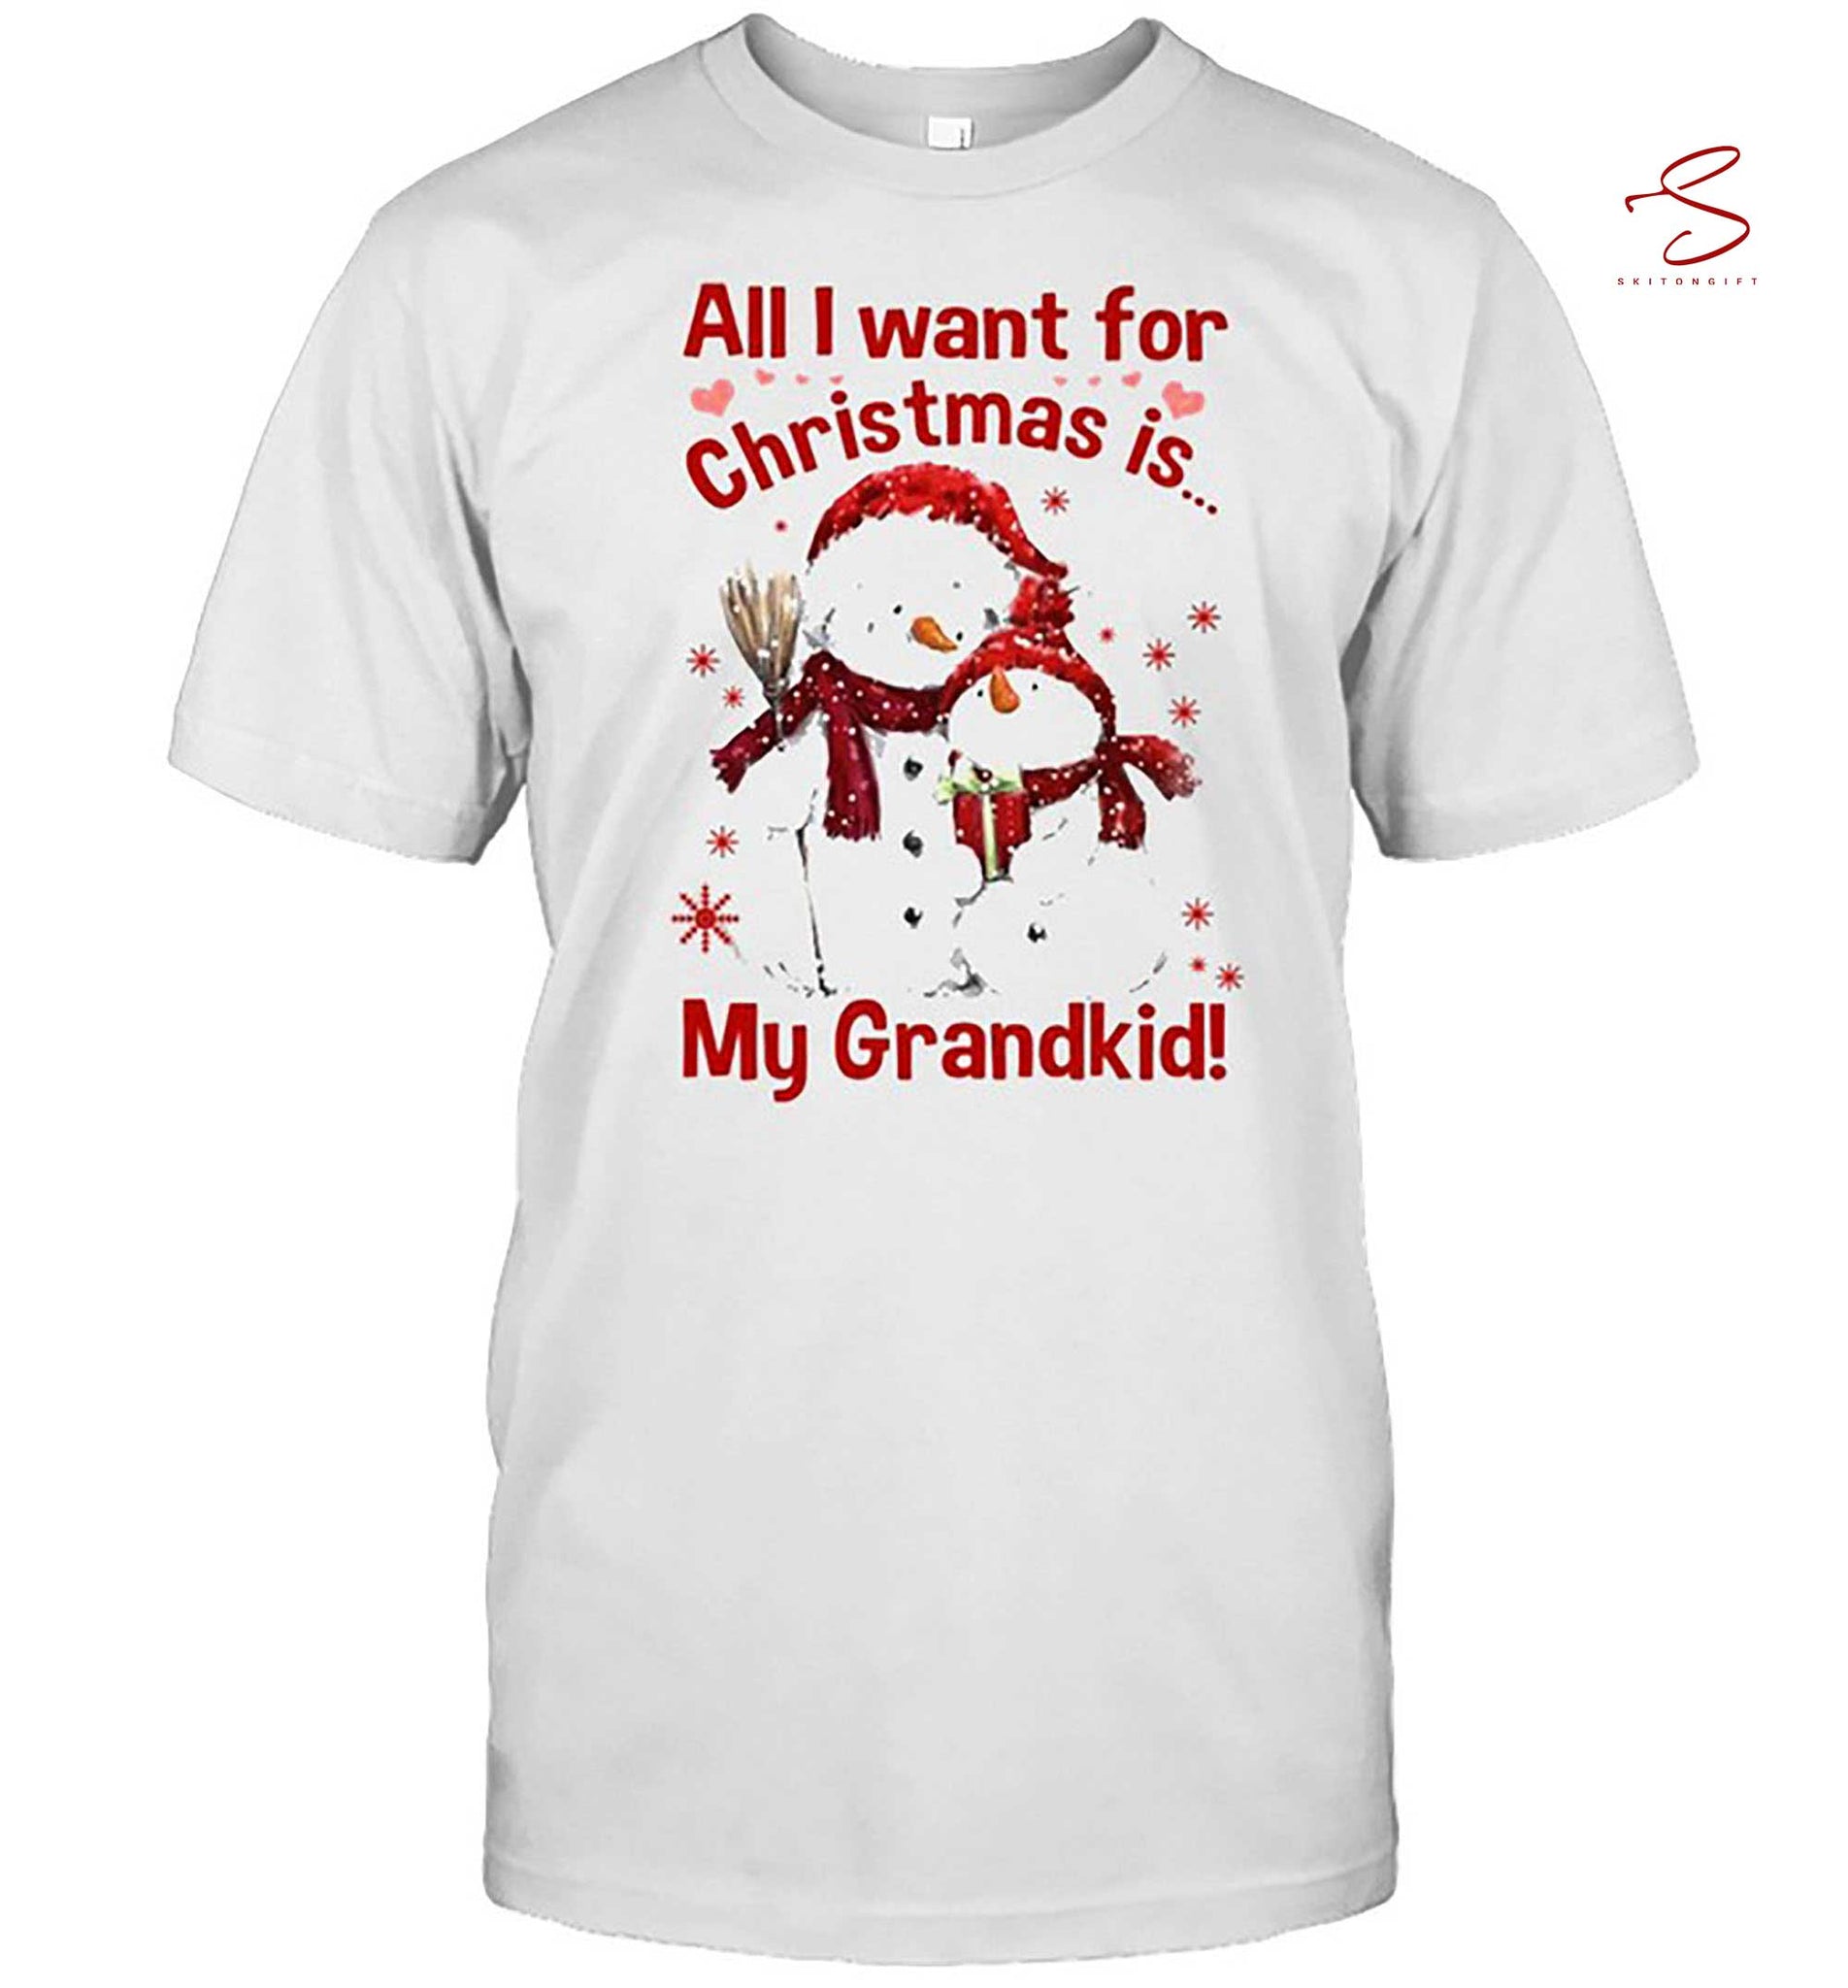 Skitongift All I Want For Christmas Is My Grandkids T Shirt